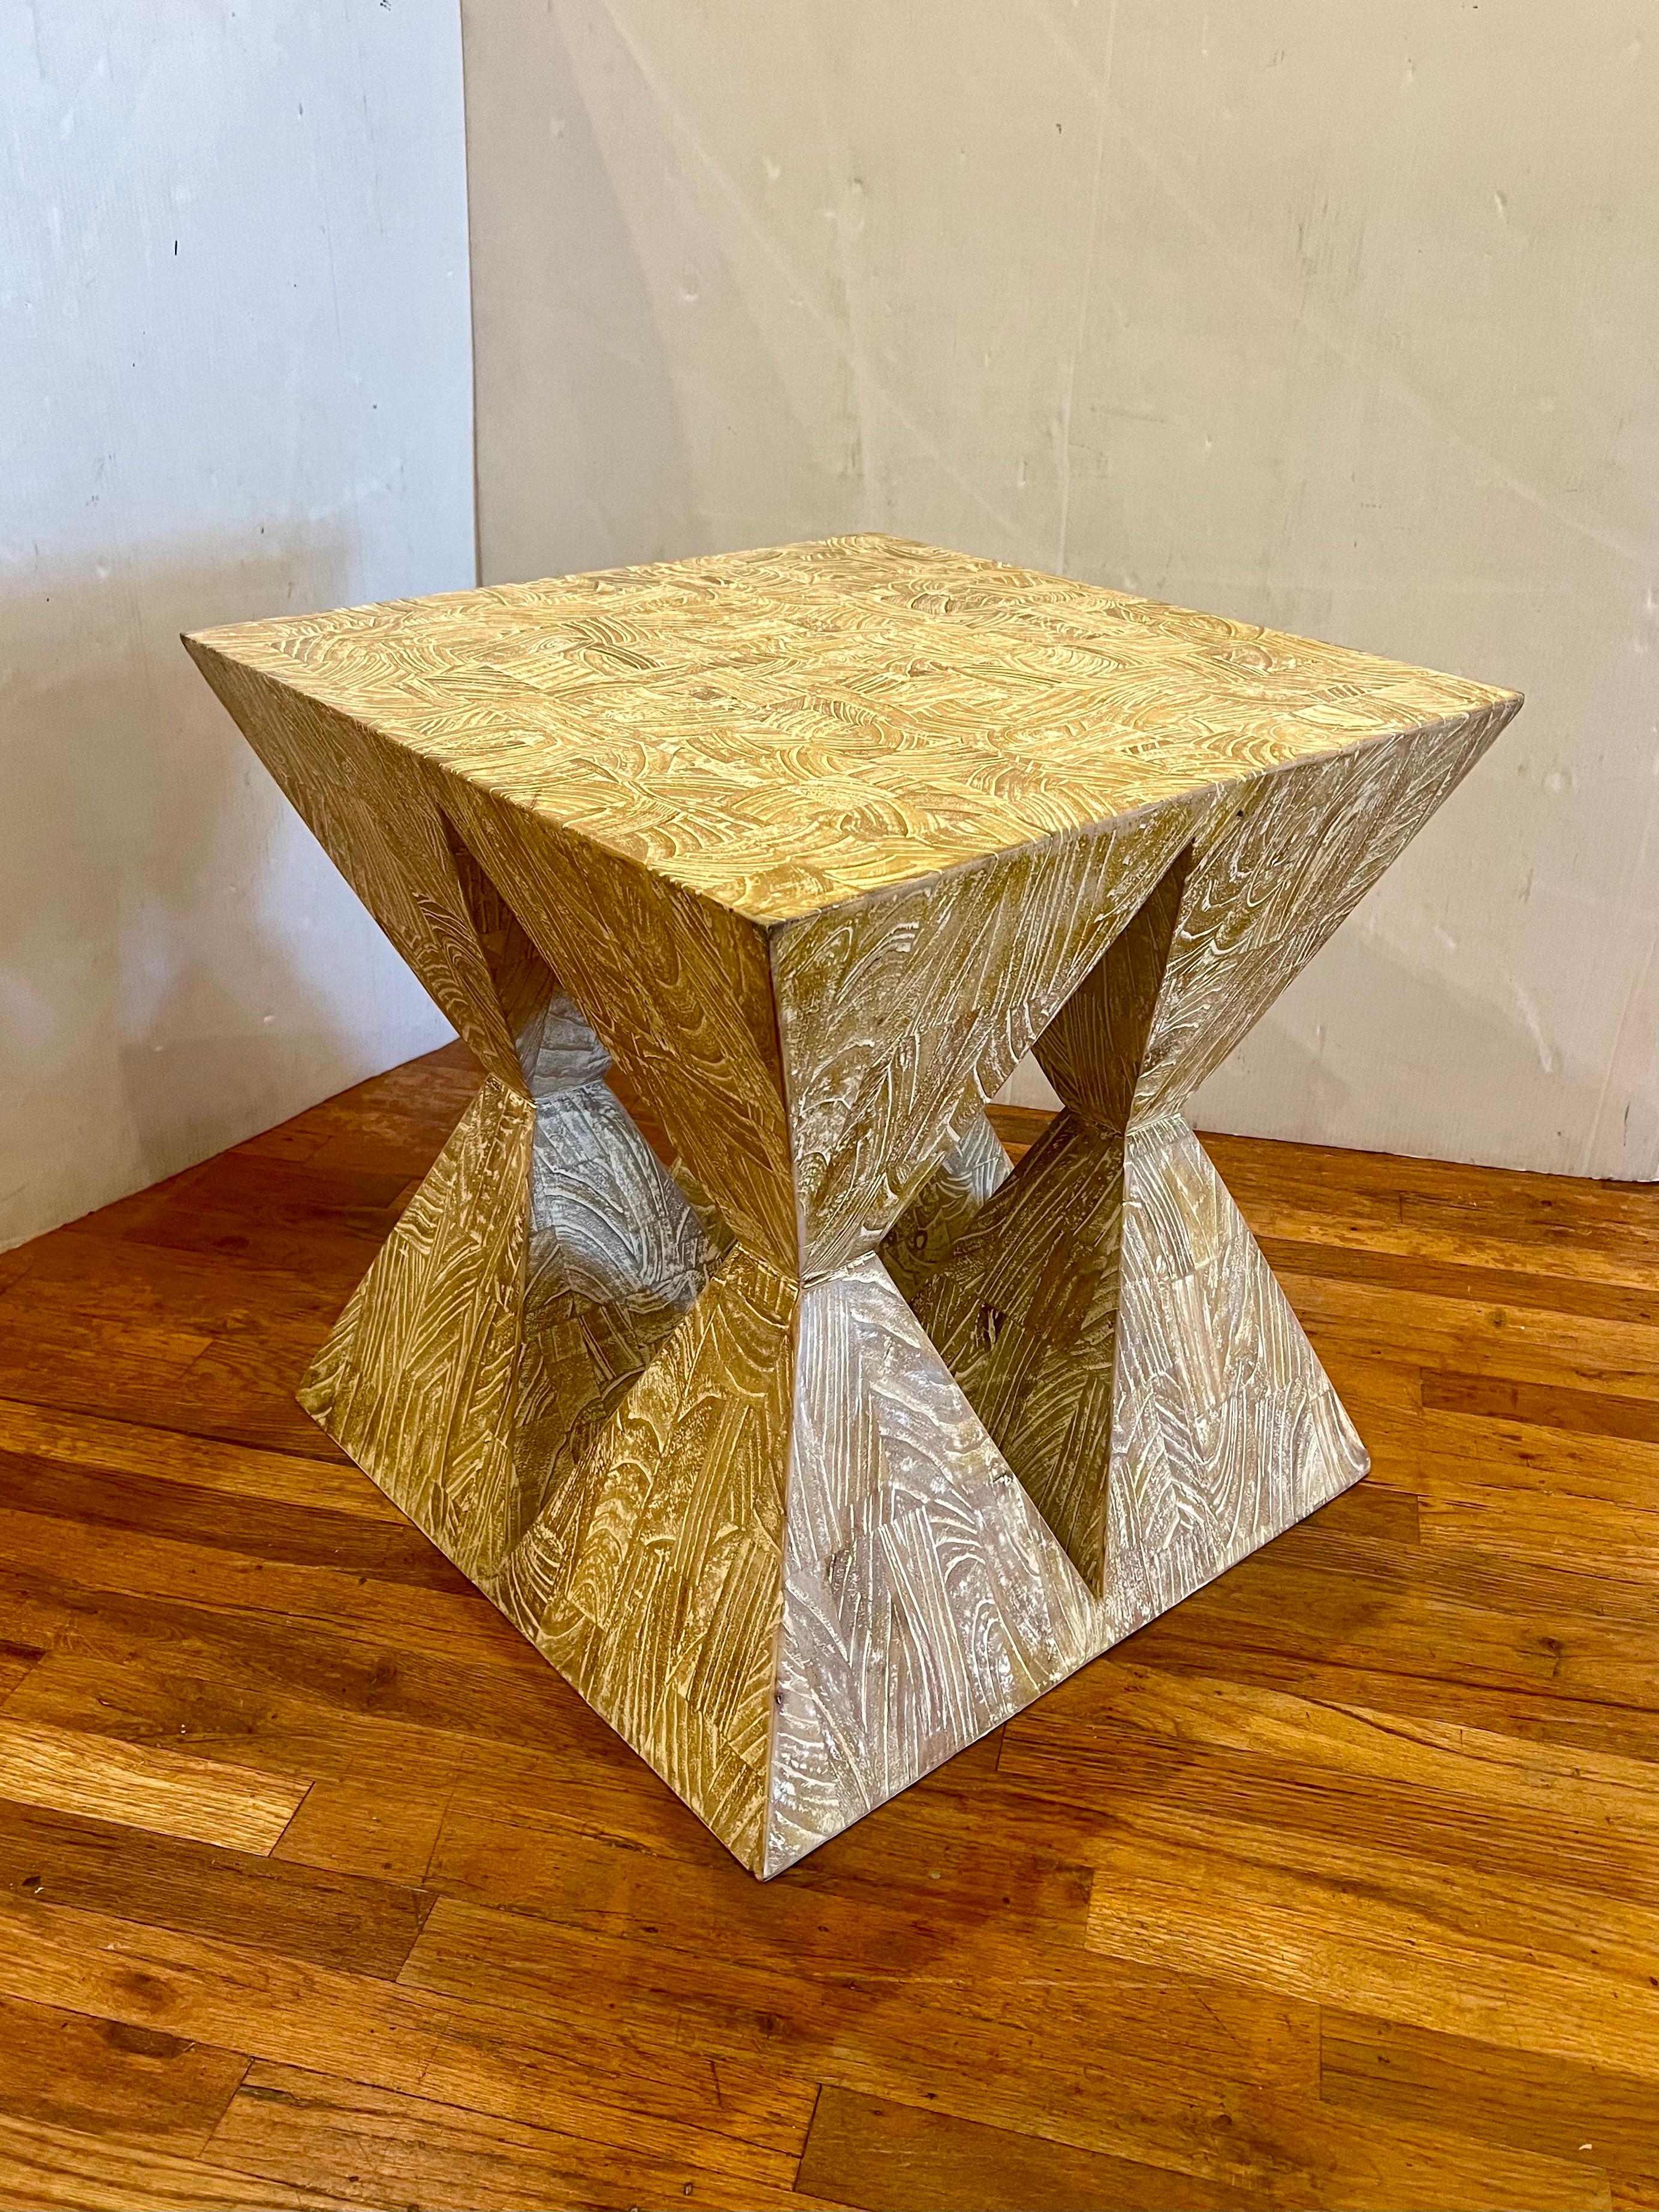 Angular geometric Table pedestal in solid oak white wash finish, great for an end table next to a sofa between 2 chairs, great condition it was ordered for a project and the customer decided to change the idea, massive construction.